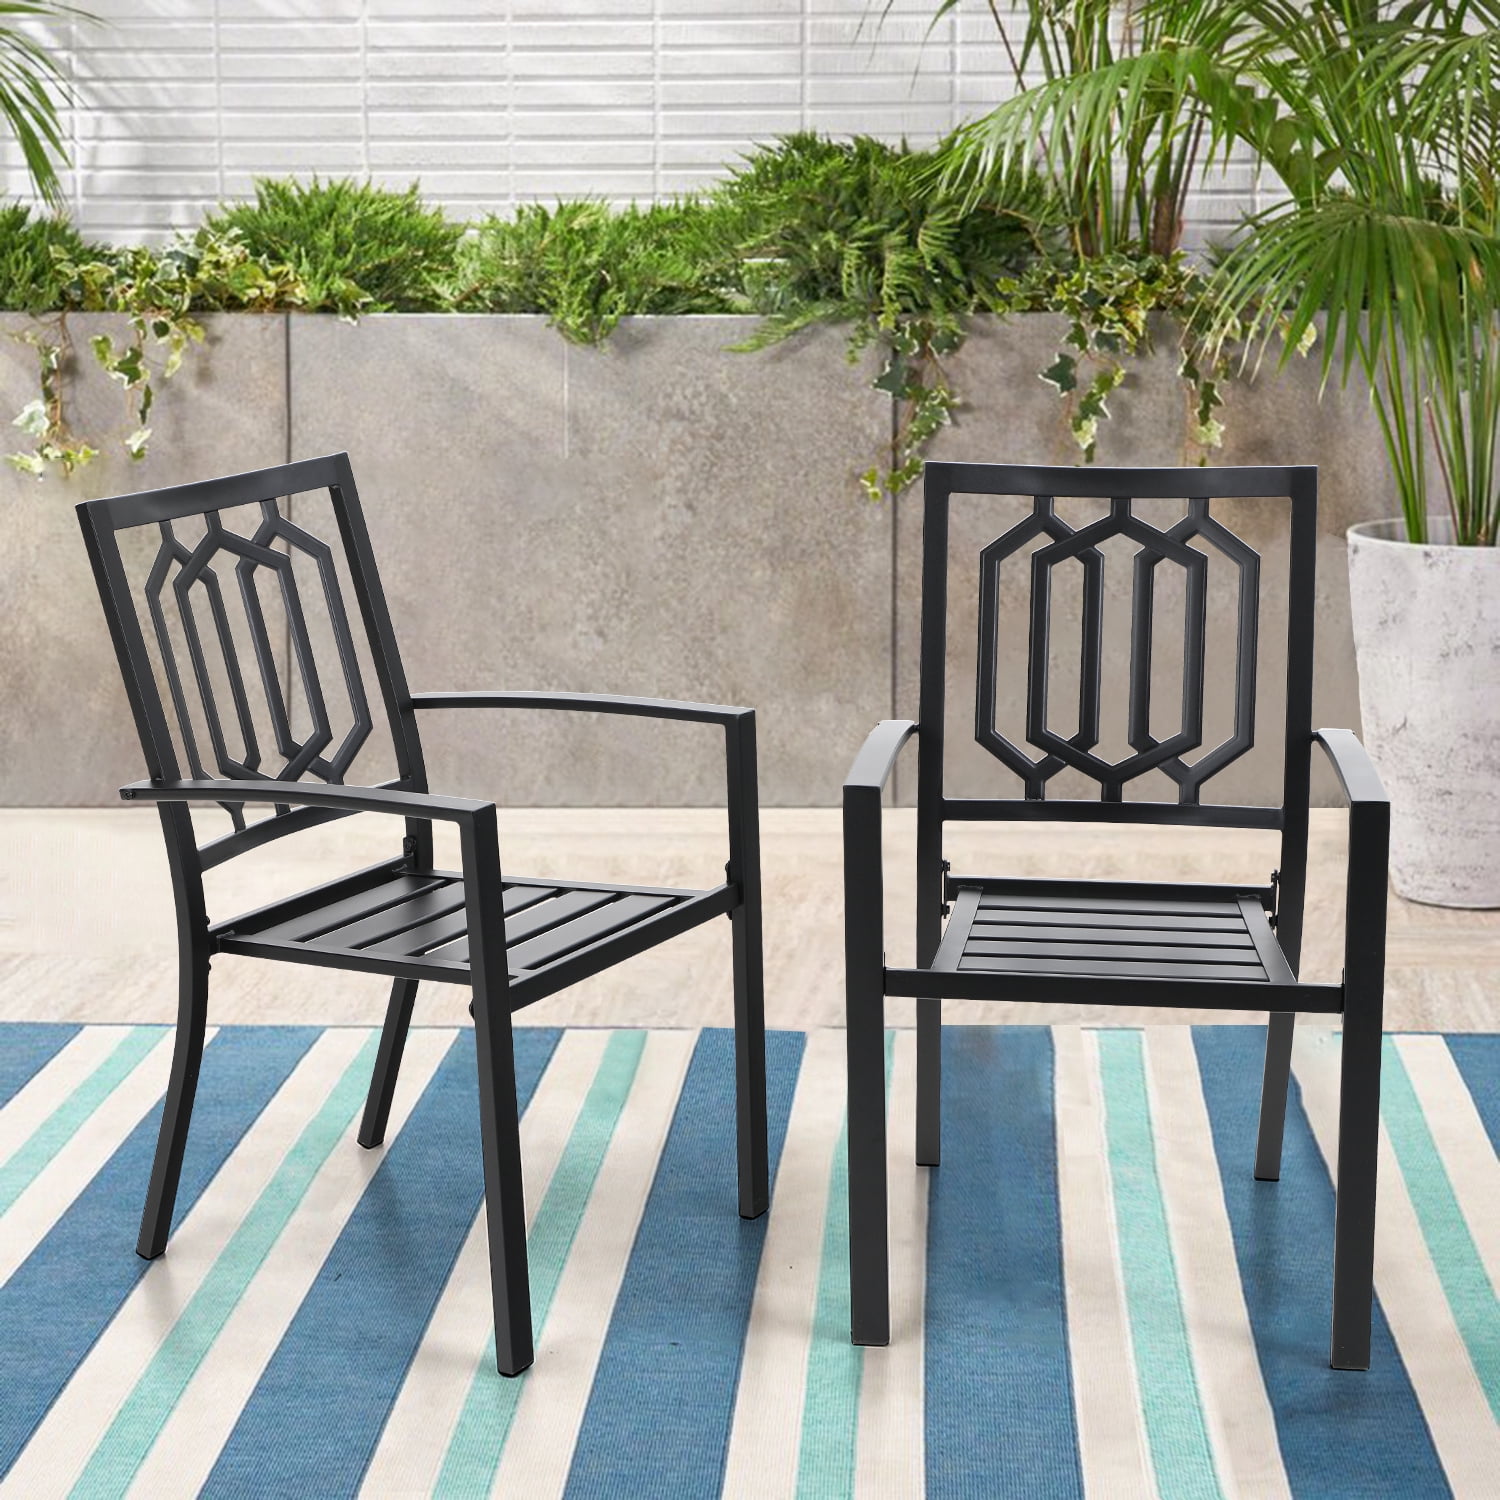 Outdoor Bistro Chairs Set of 2 Metal Patio Dining Seating Stackable Chairs Set for Garden Porch Backyard Black 